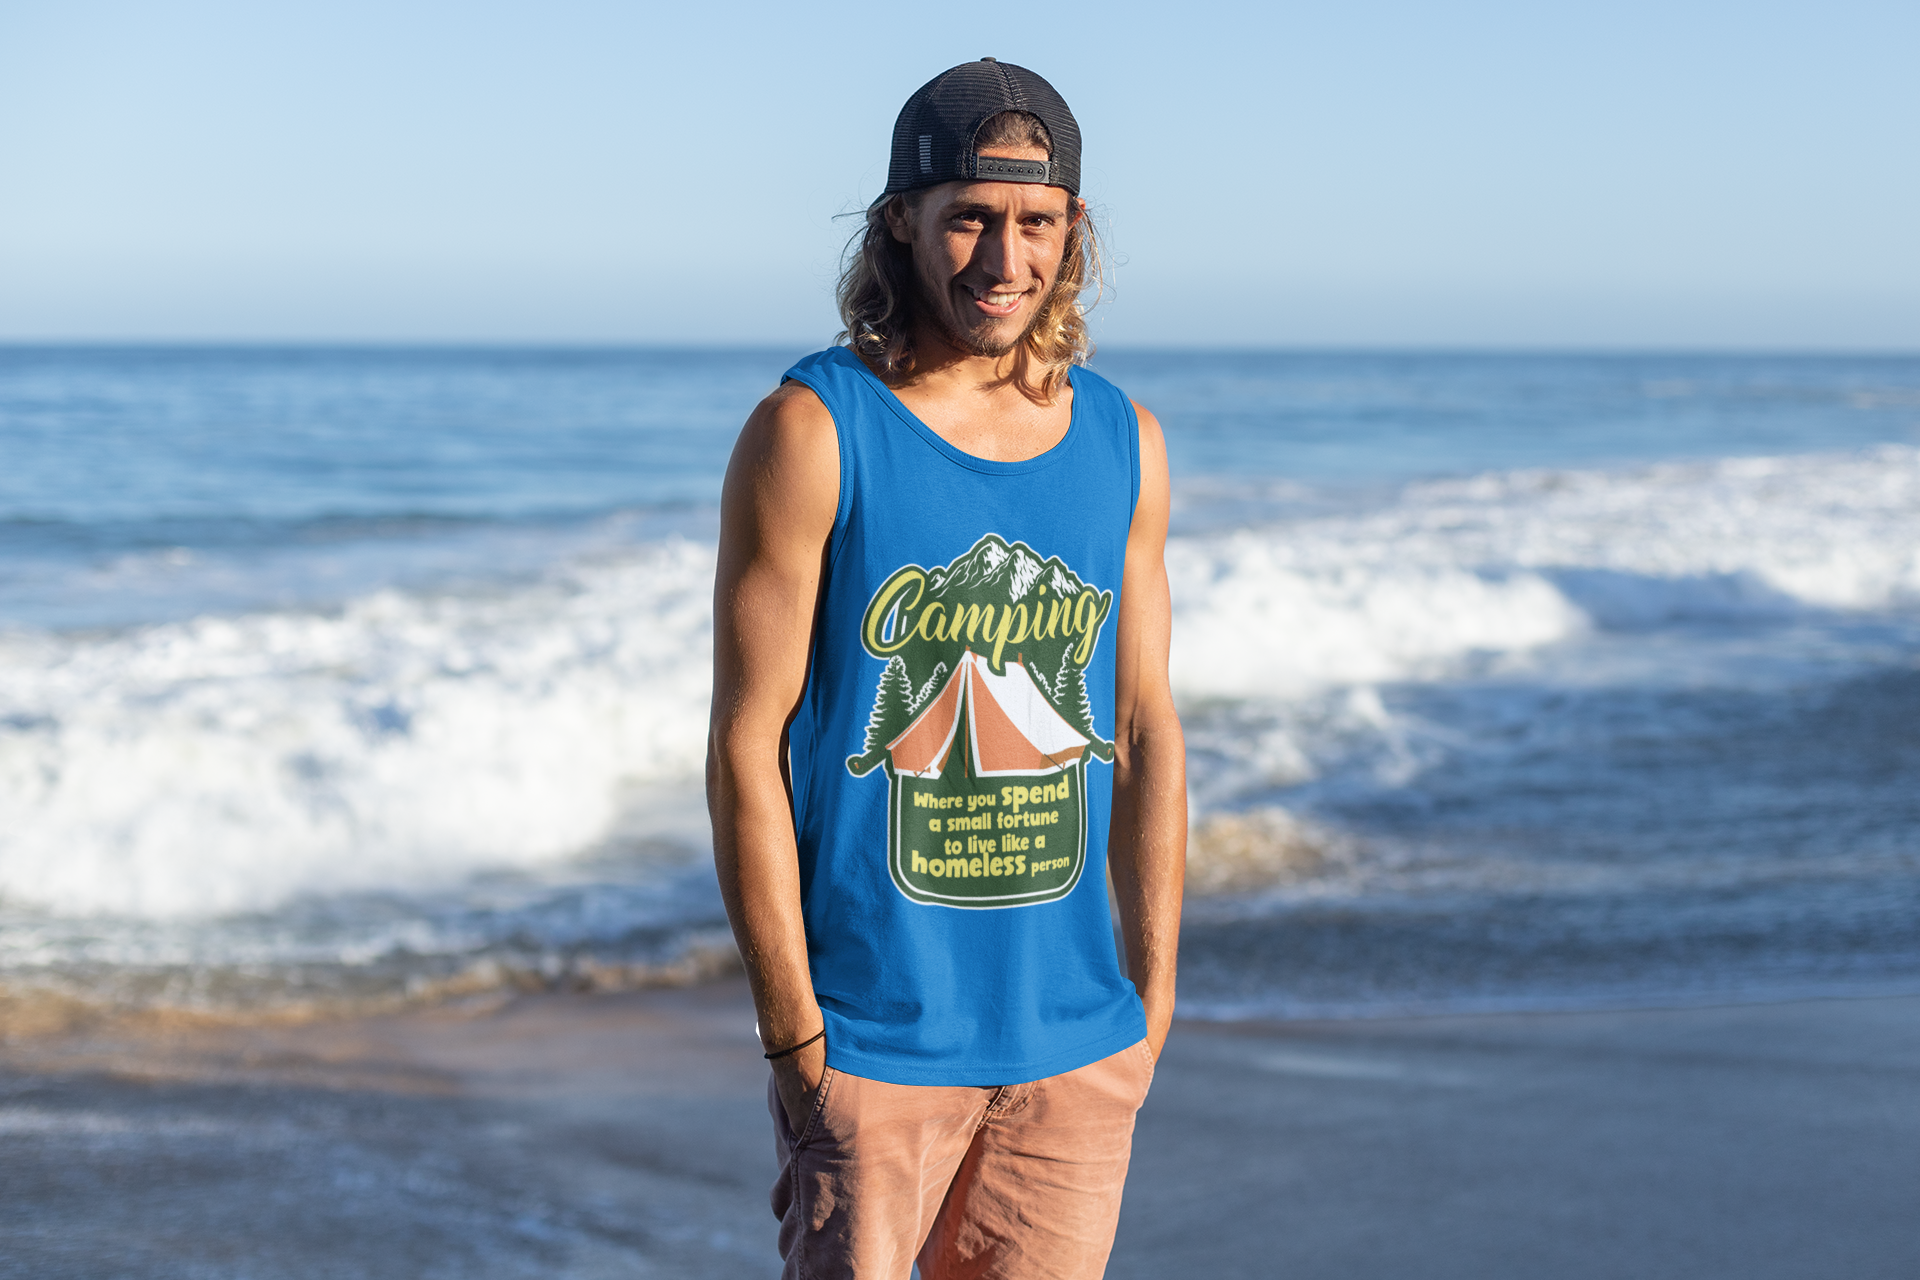 Soft 100% cotton tank top.
Removable tag for comfort